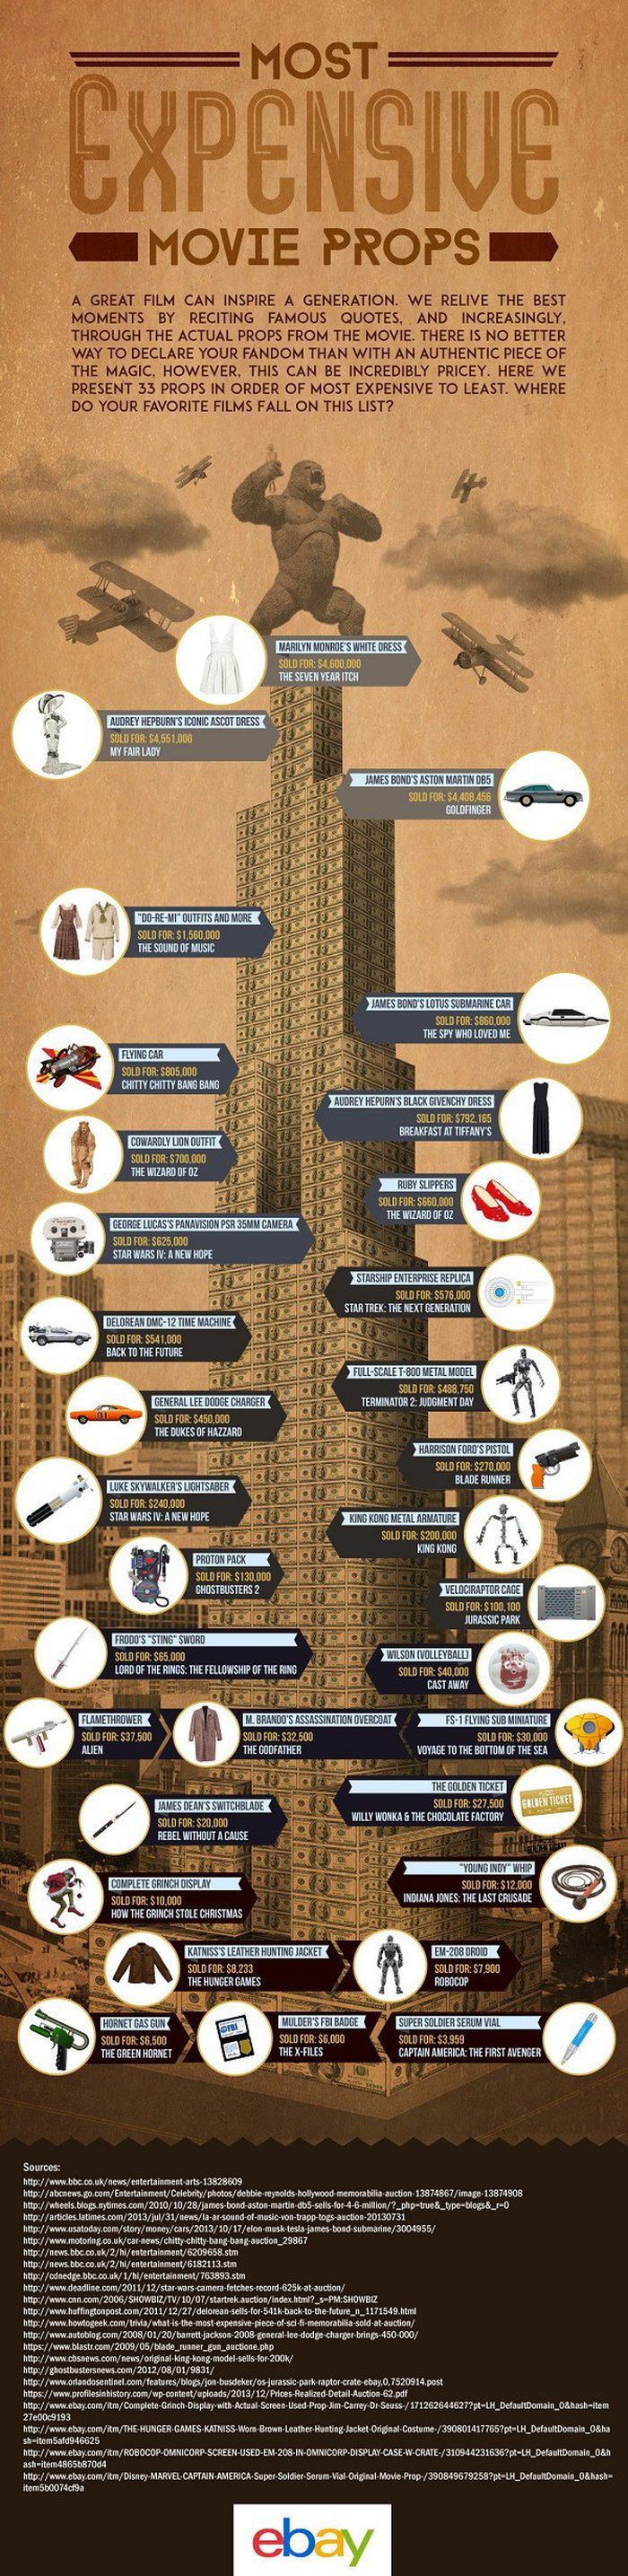 Expensive Movie Props That Sold For Big Money (infographic)